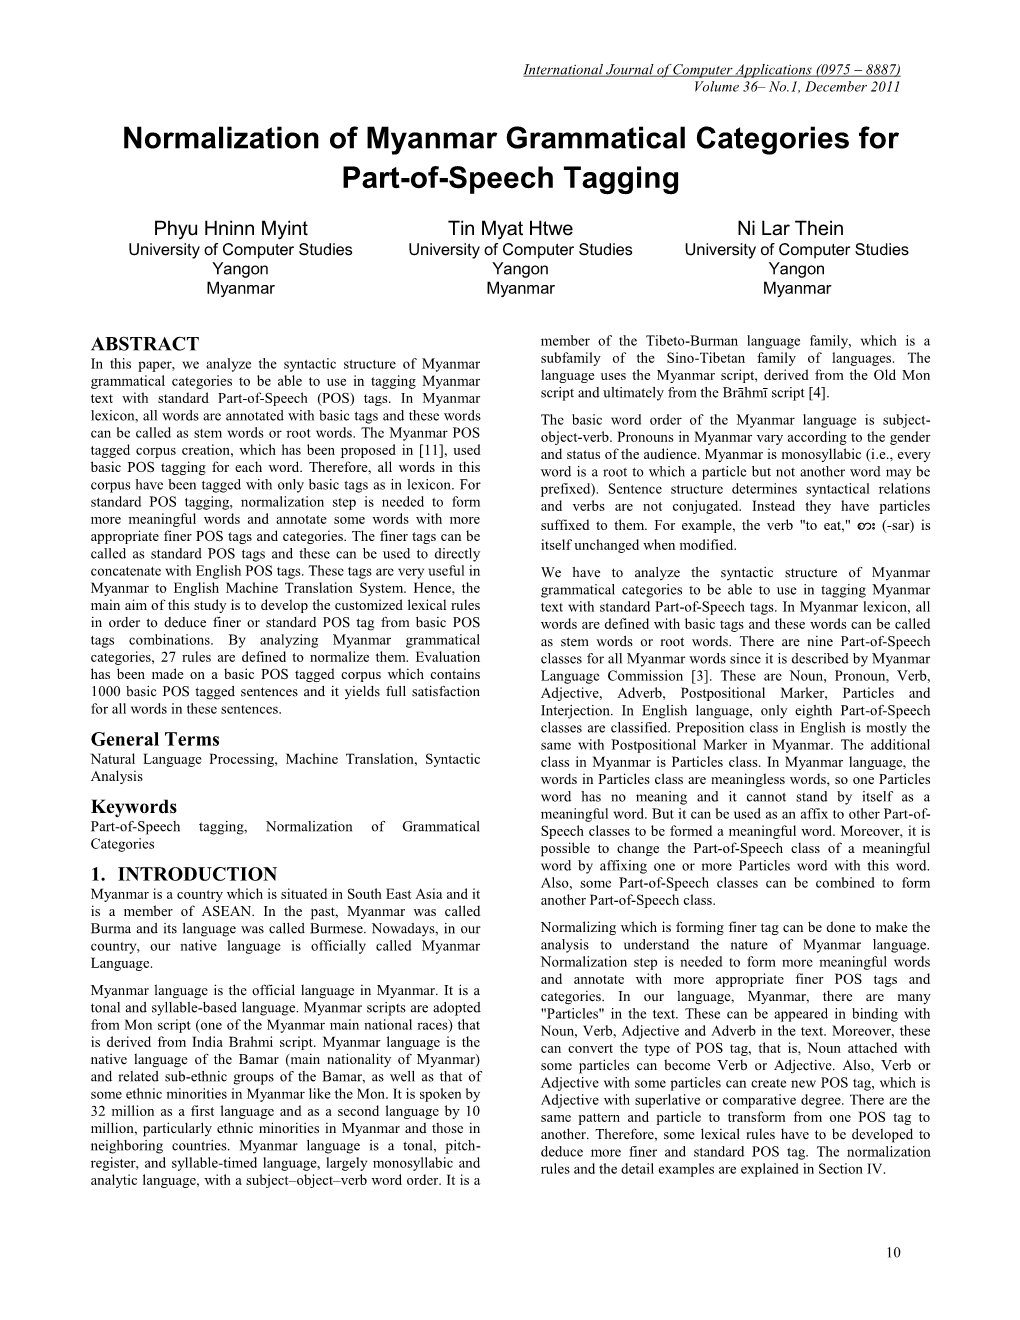 Normalization of Myanmar Grammatical Categories for Part-Of-Speech Tagging